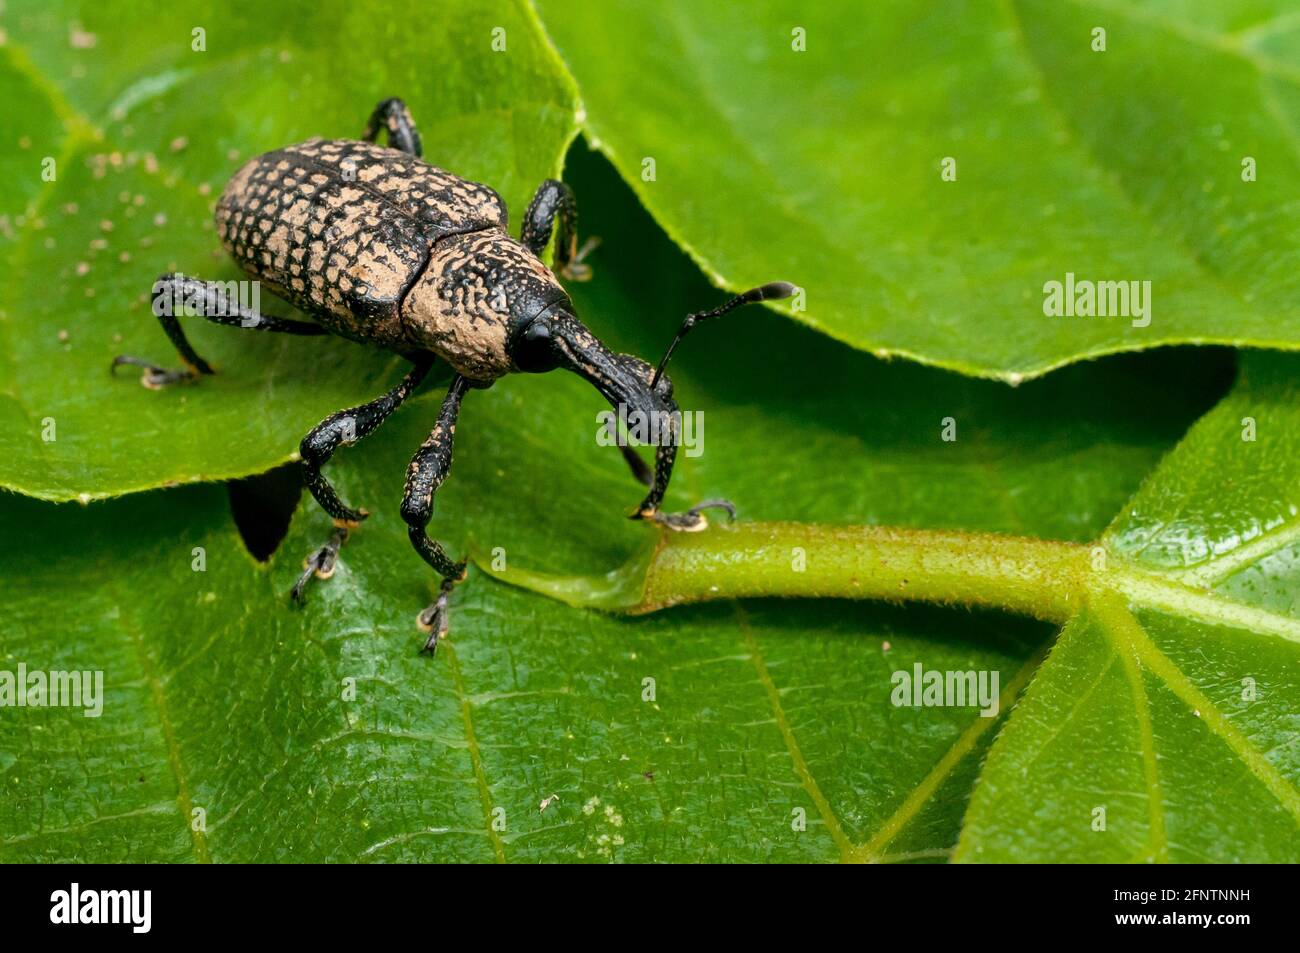 Adult fig tree weevil (aclees cribratus Gyllenhy). This beetle native to Southeast Asia is infesting the fig trees of central Italy. Stock Photo